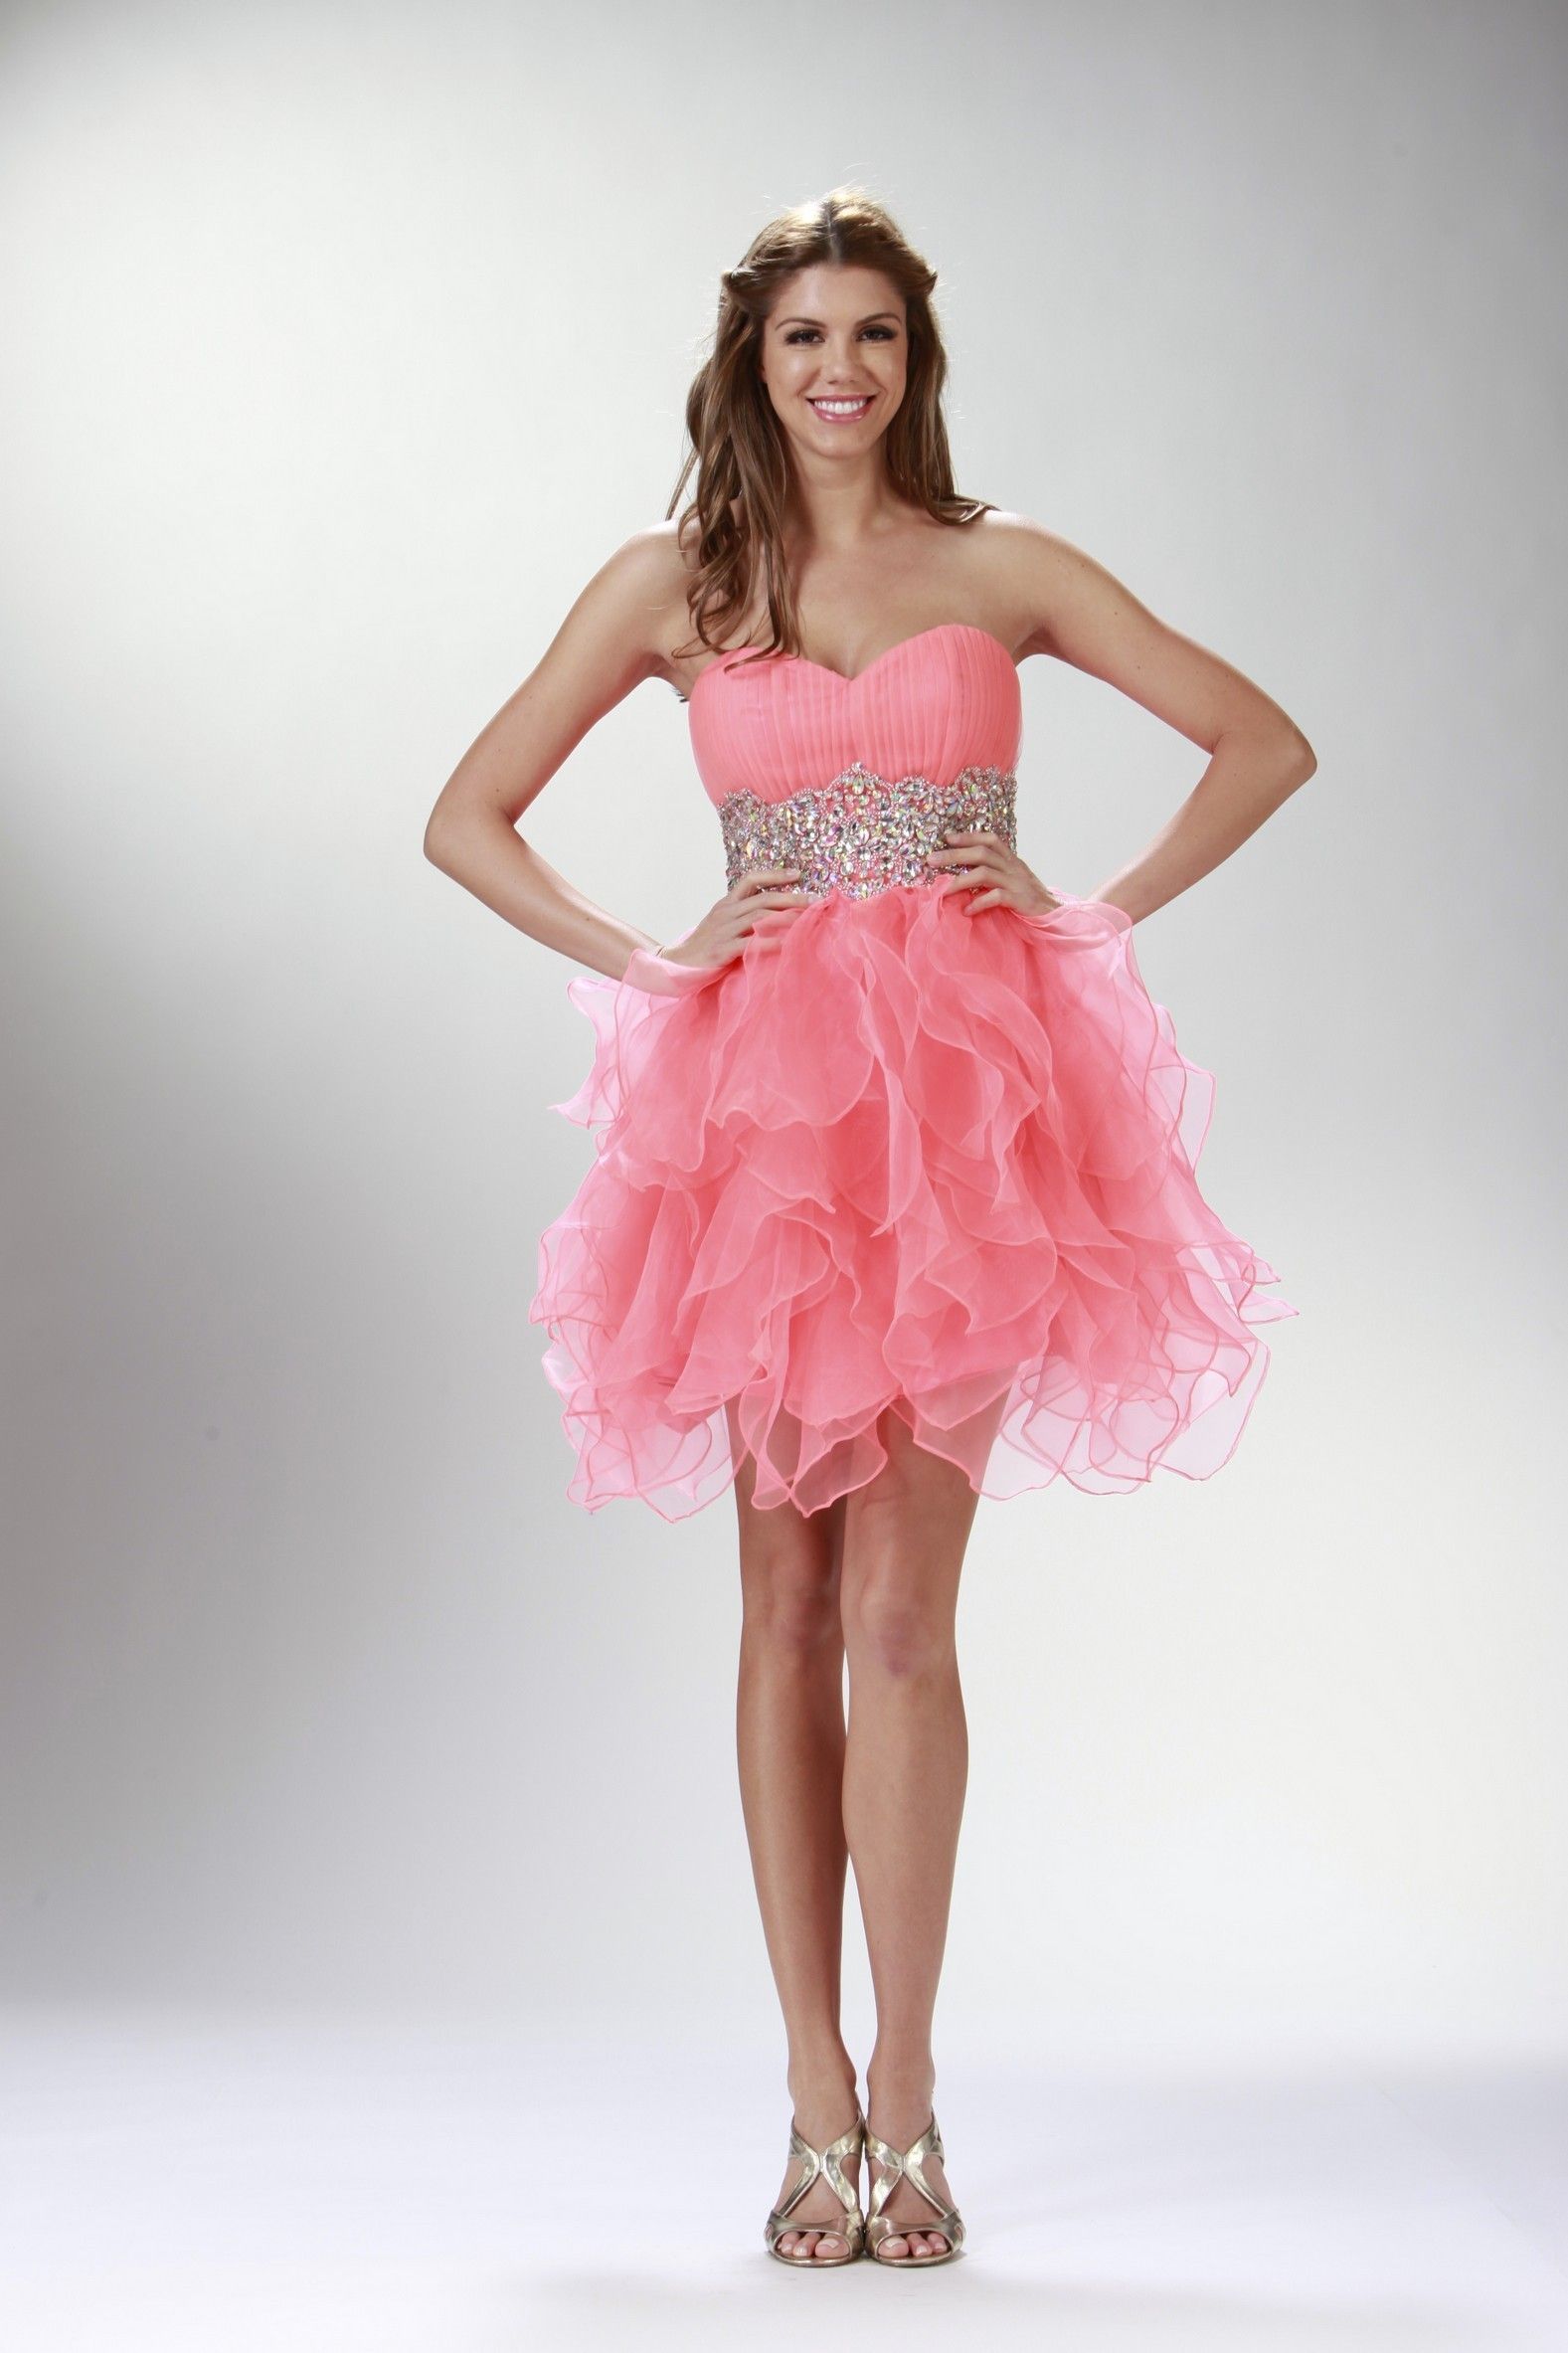 general-ideas-alluring-coral-strapless-homecoming-dress-sweetheart-wonderful-pink-a-line-short-prom-dresses-splendid-photos-of-homecoming-dresses-design-ideas-juniors-party-dresses-black